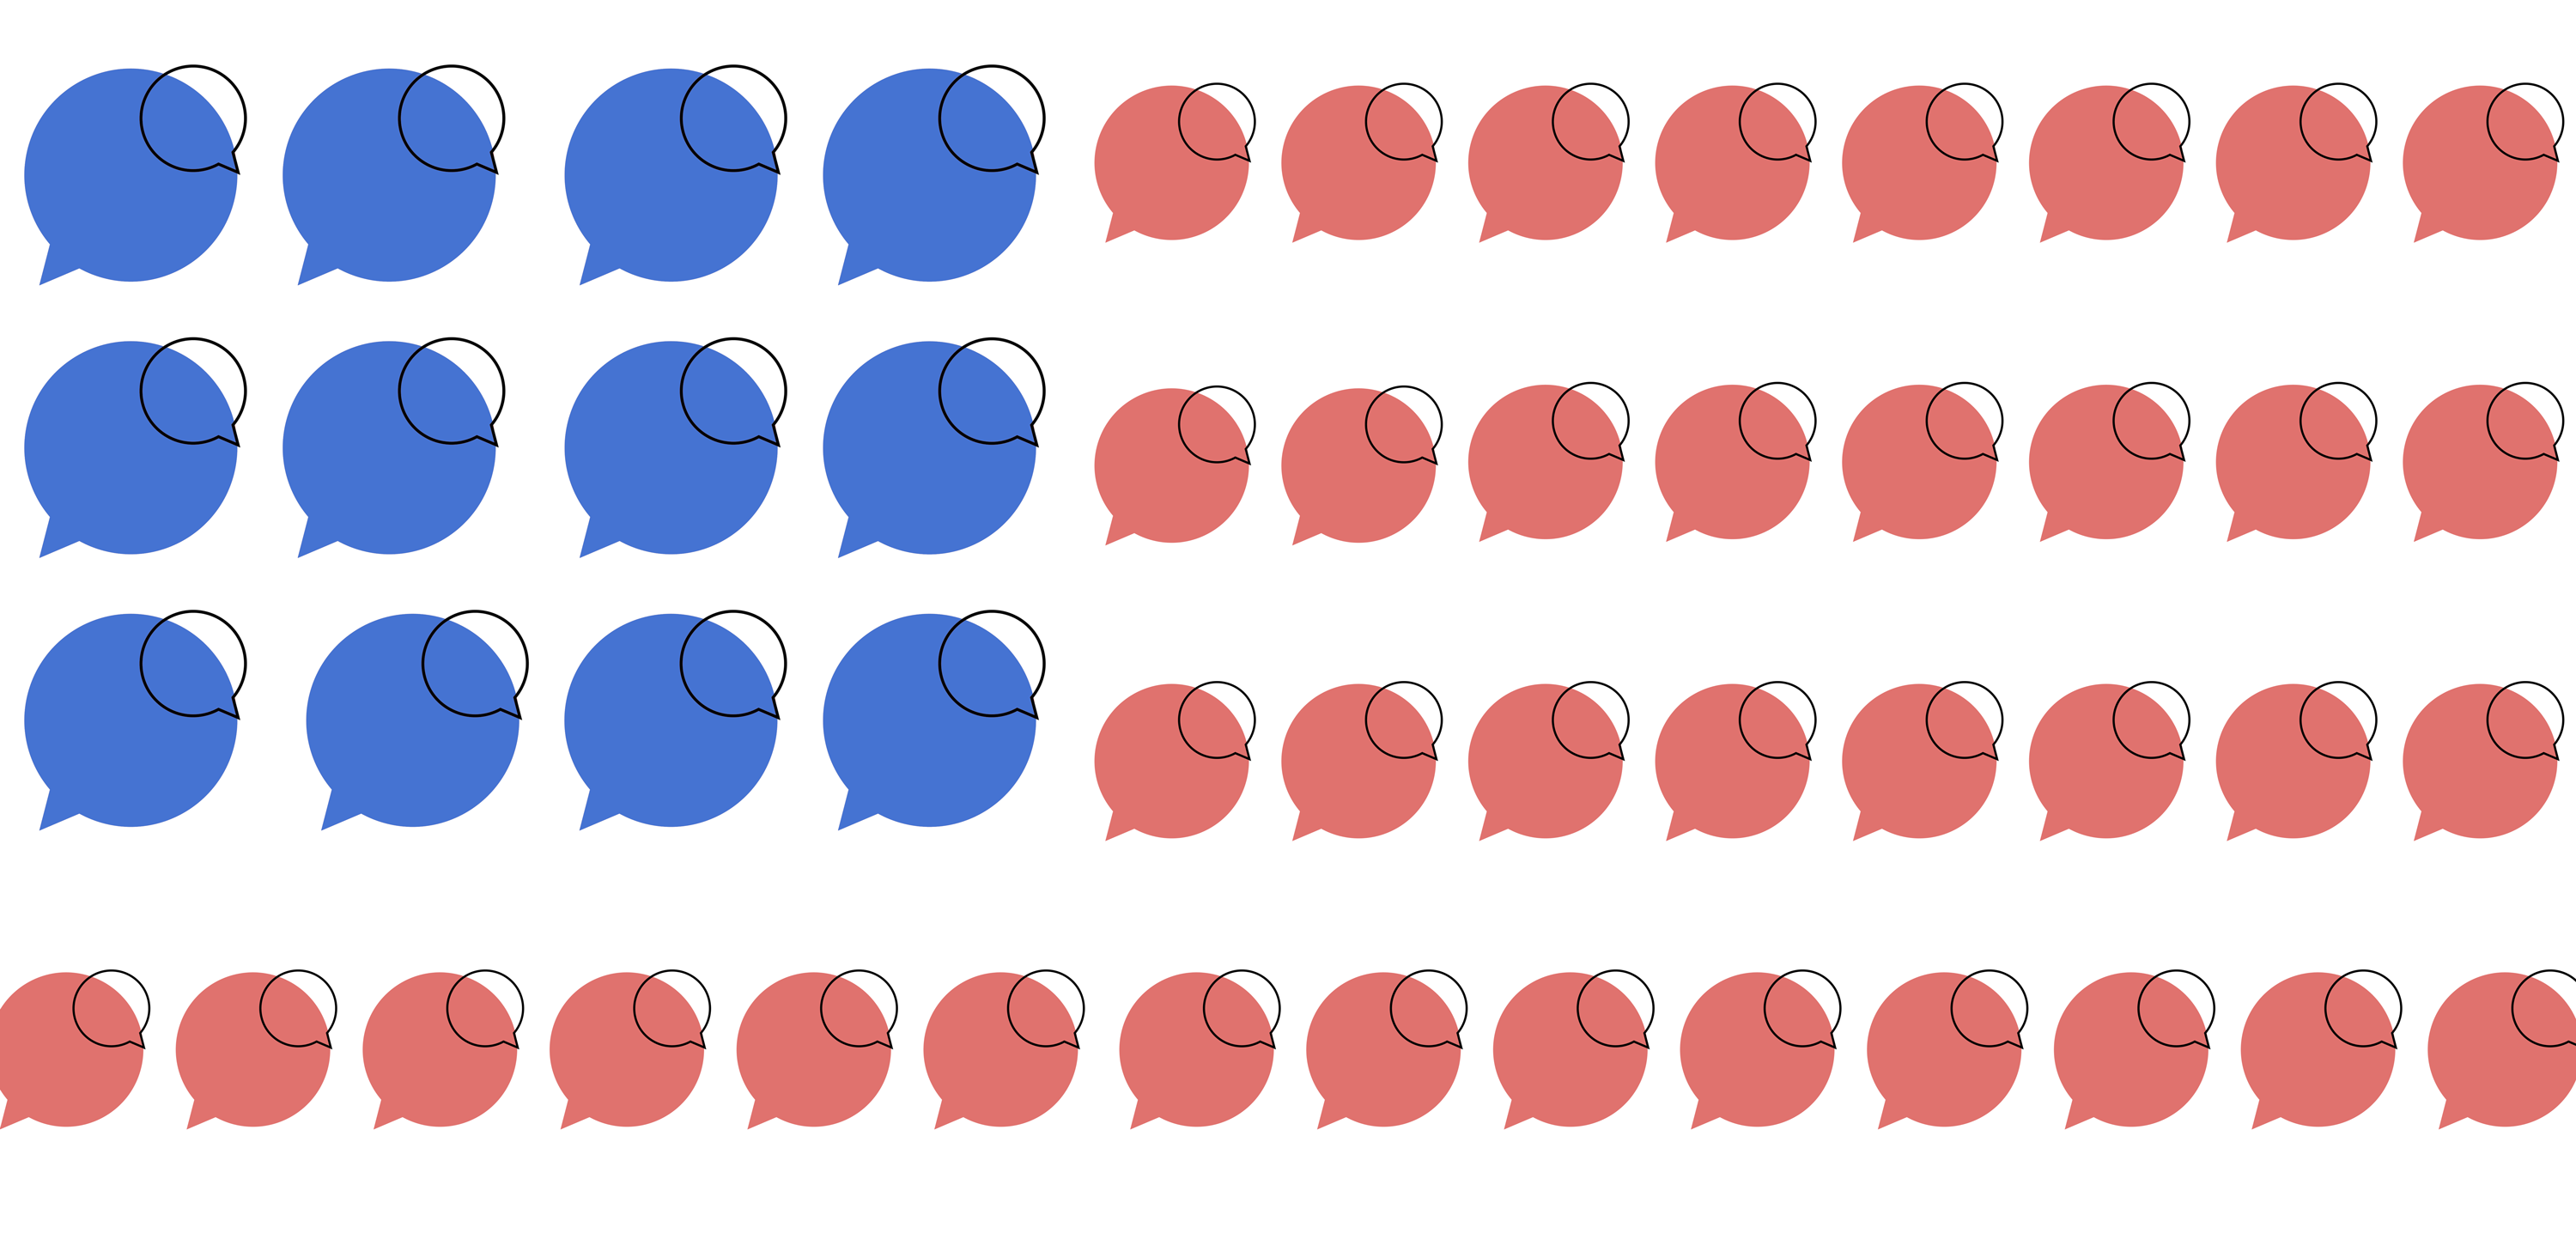 Speech bubbles are used to illustrate the United States of American flag